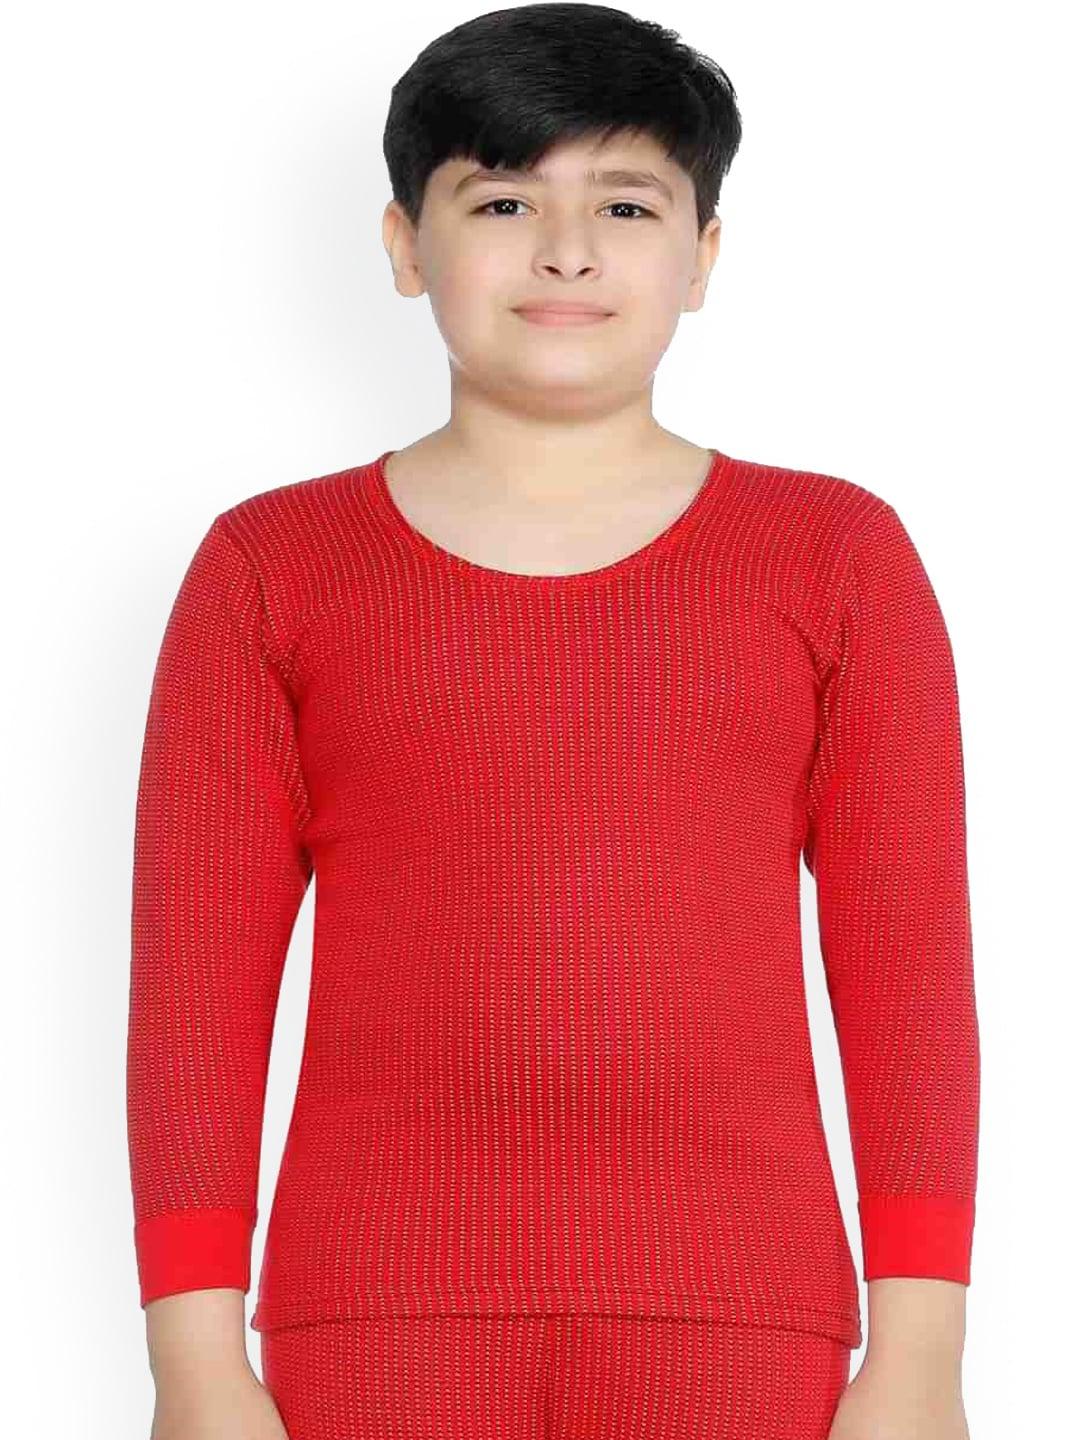 bodycare kids boys red printed cotton thermal top